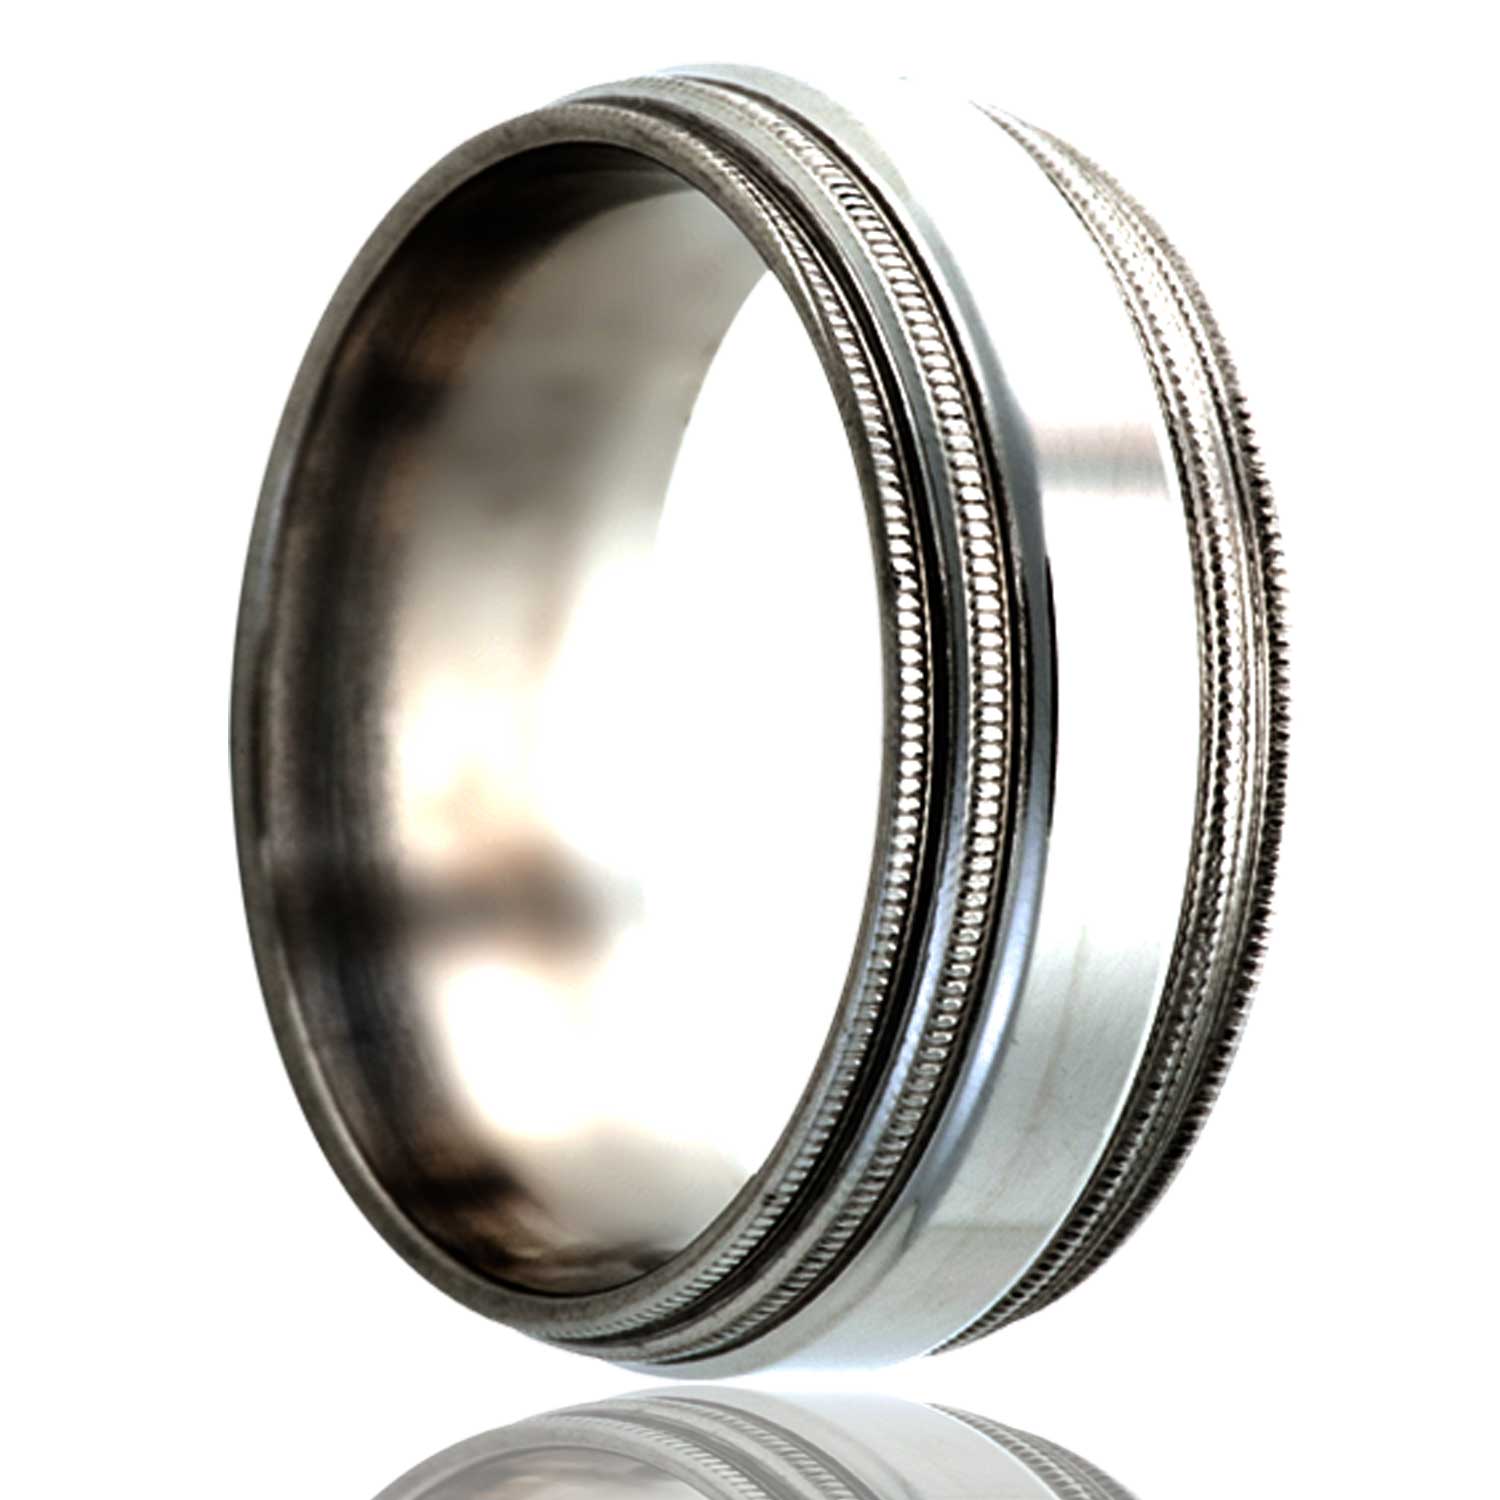 A titanium wedding band with multi stepped edges displayed on a neutral white background.